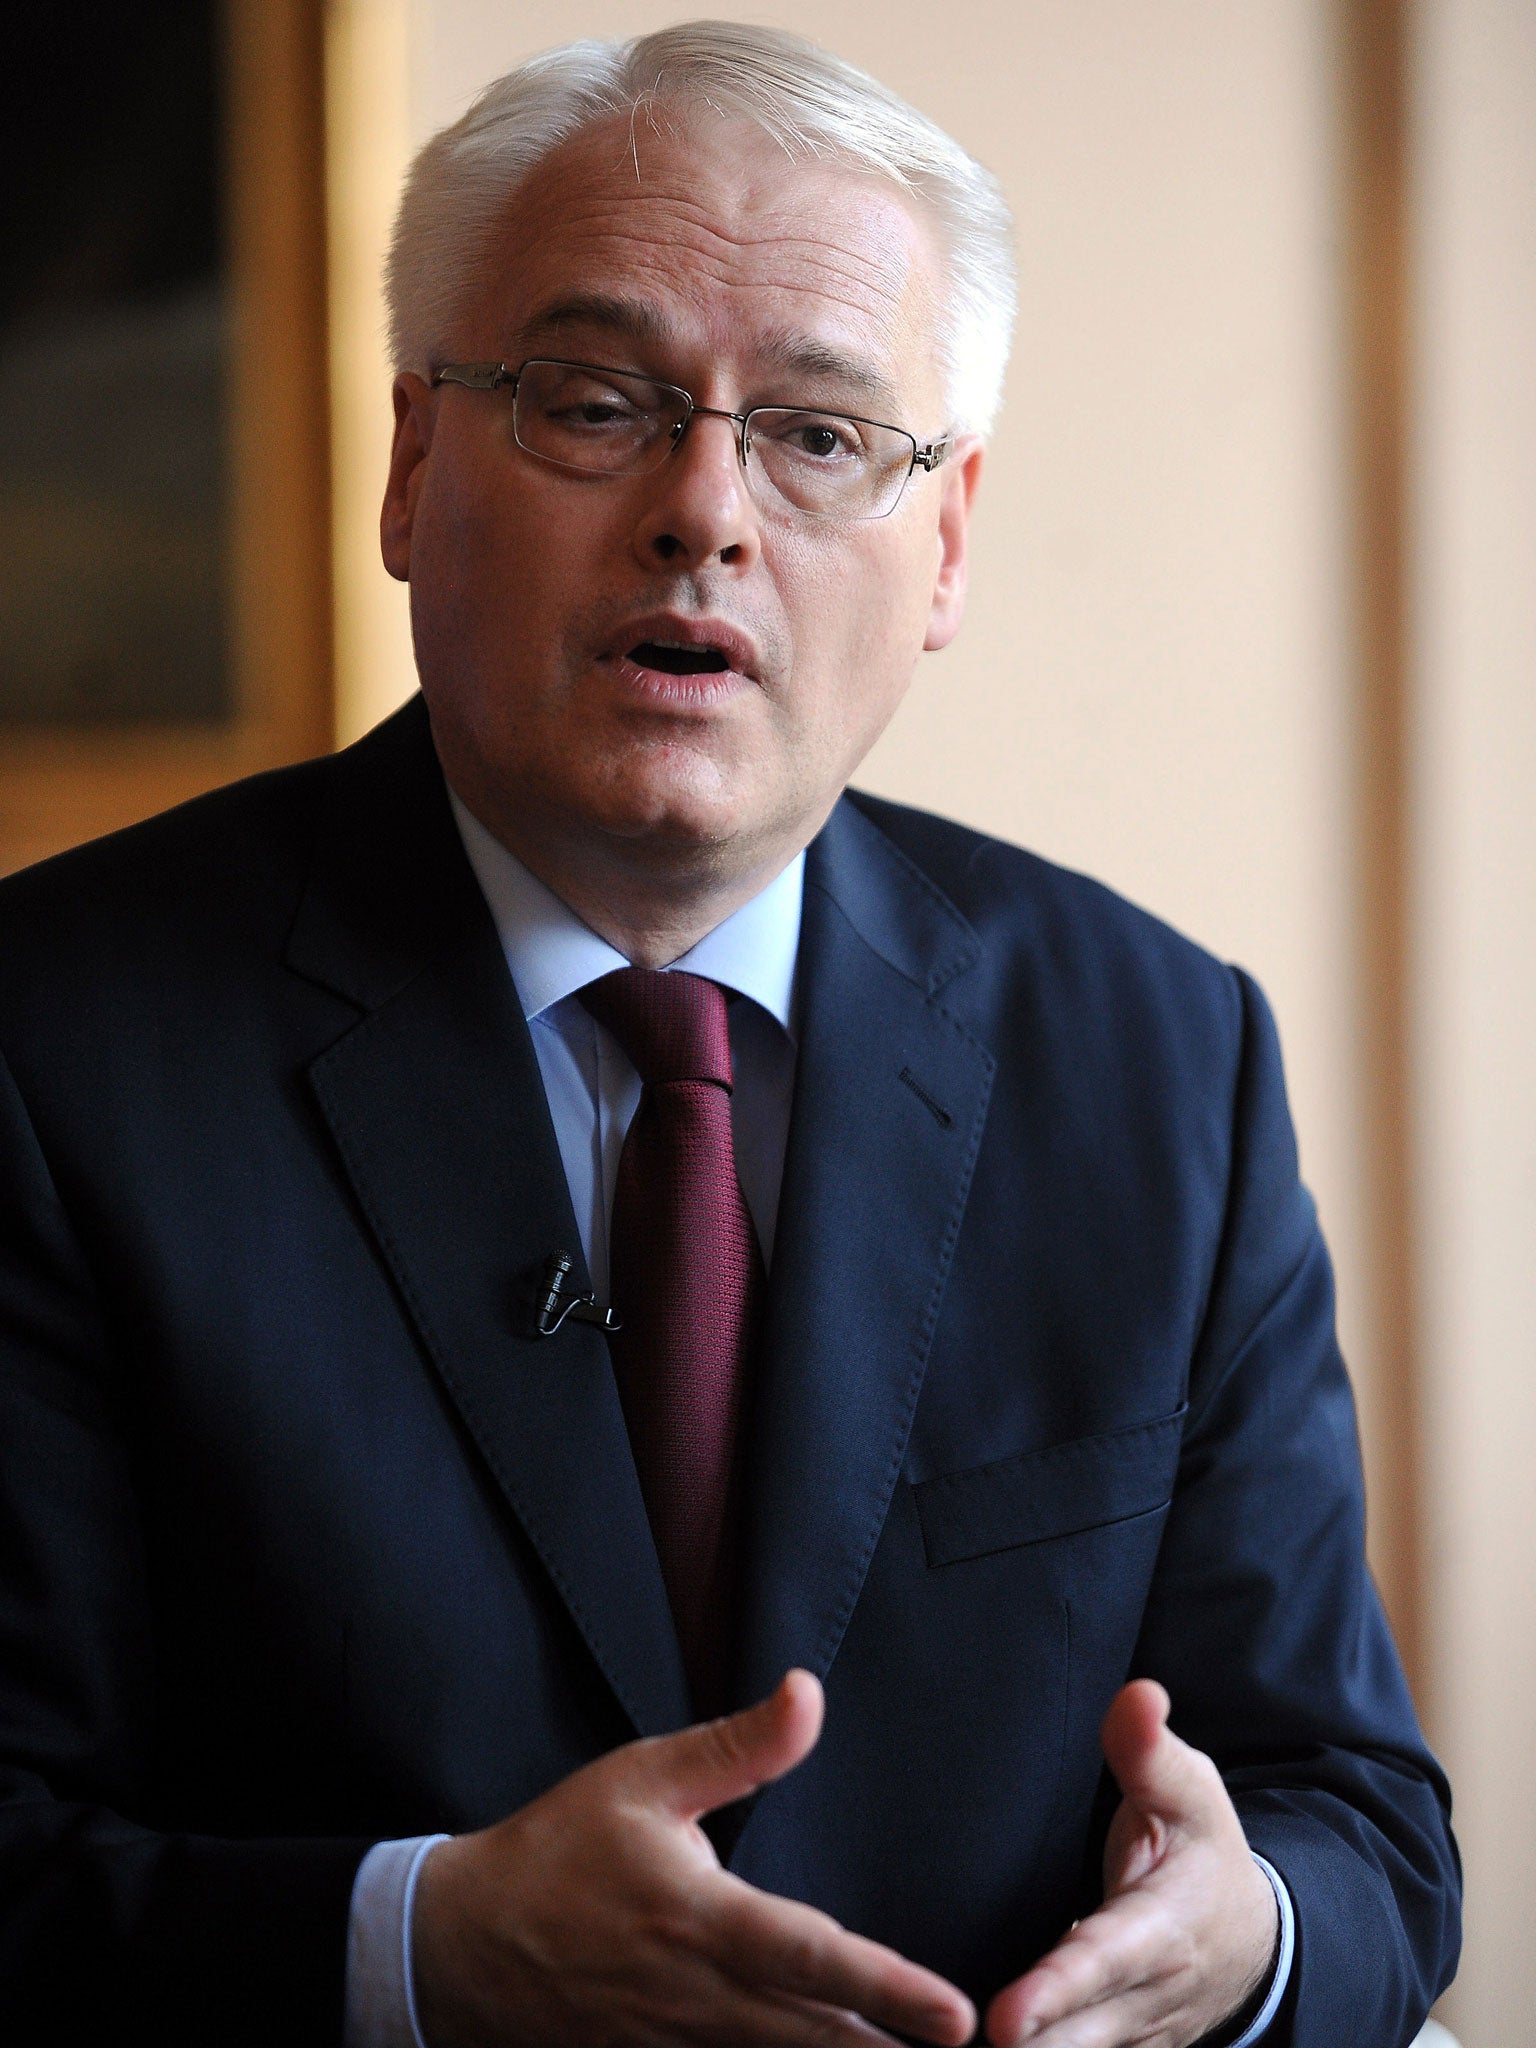 Croatia’s President, Ivo Josipovic, says the only future for his country is in Europe